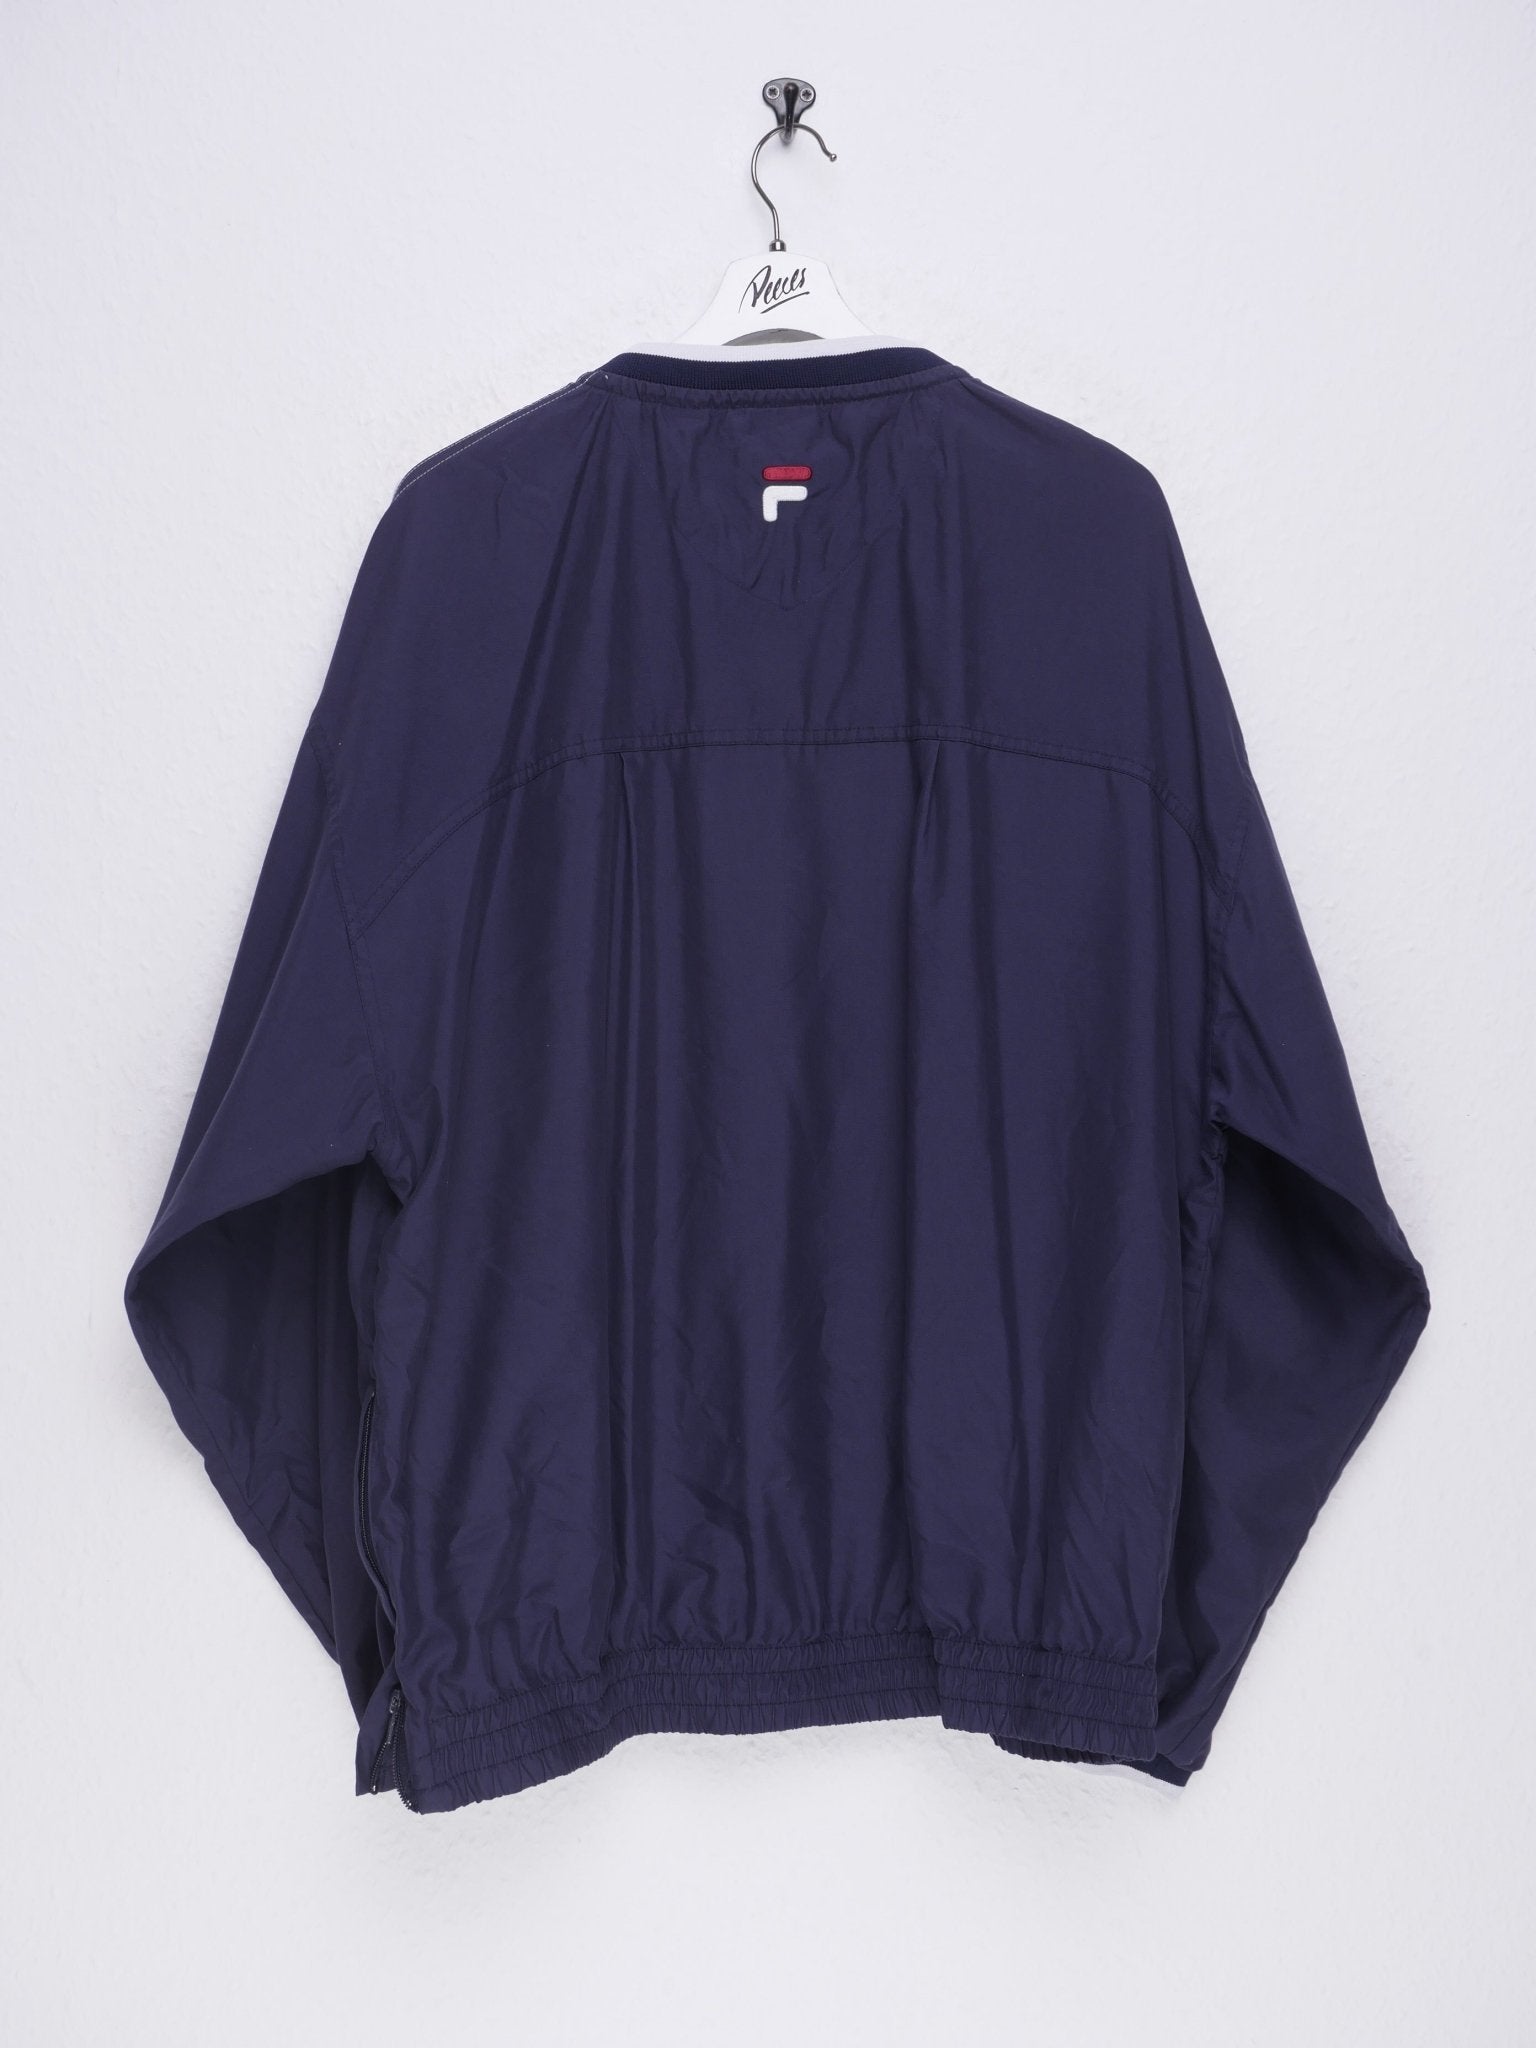 Fila embroidered Logo navy Jersey Sweater - Peeces